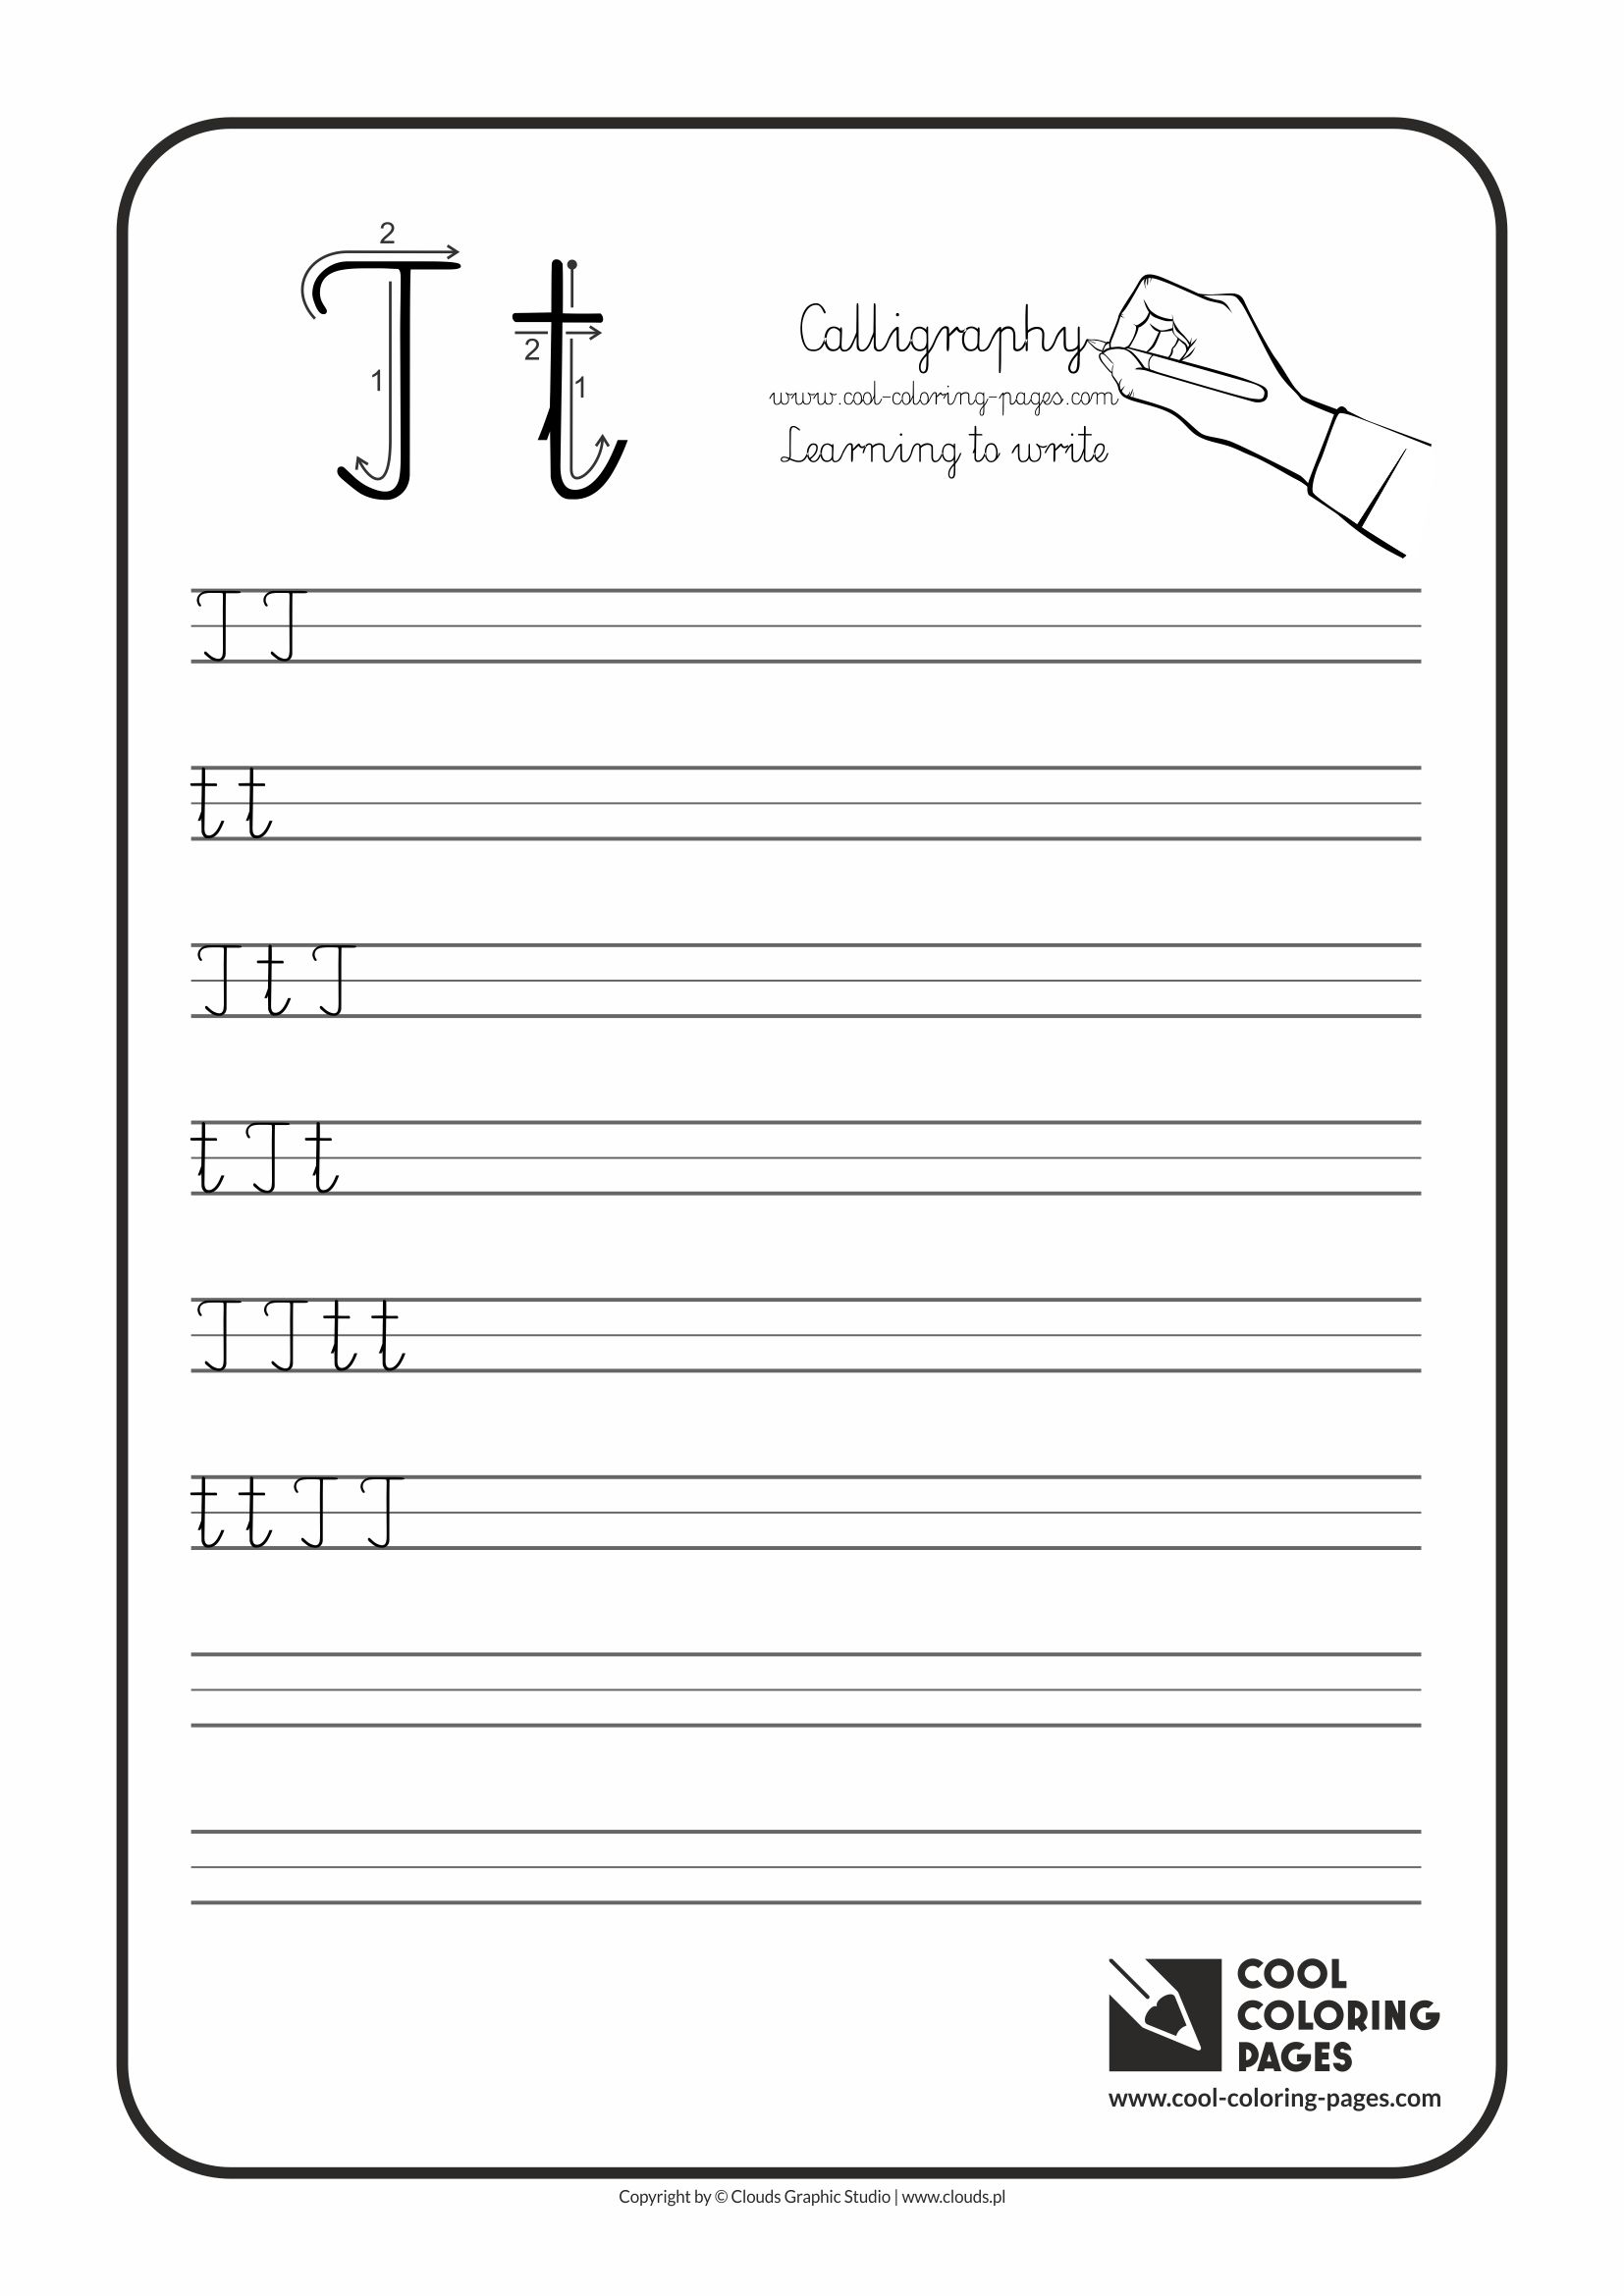 Cool Coloring Pages / Calligraphy / Letter T - Handwriting for kids / Worksheets